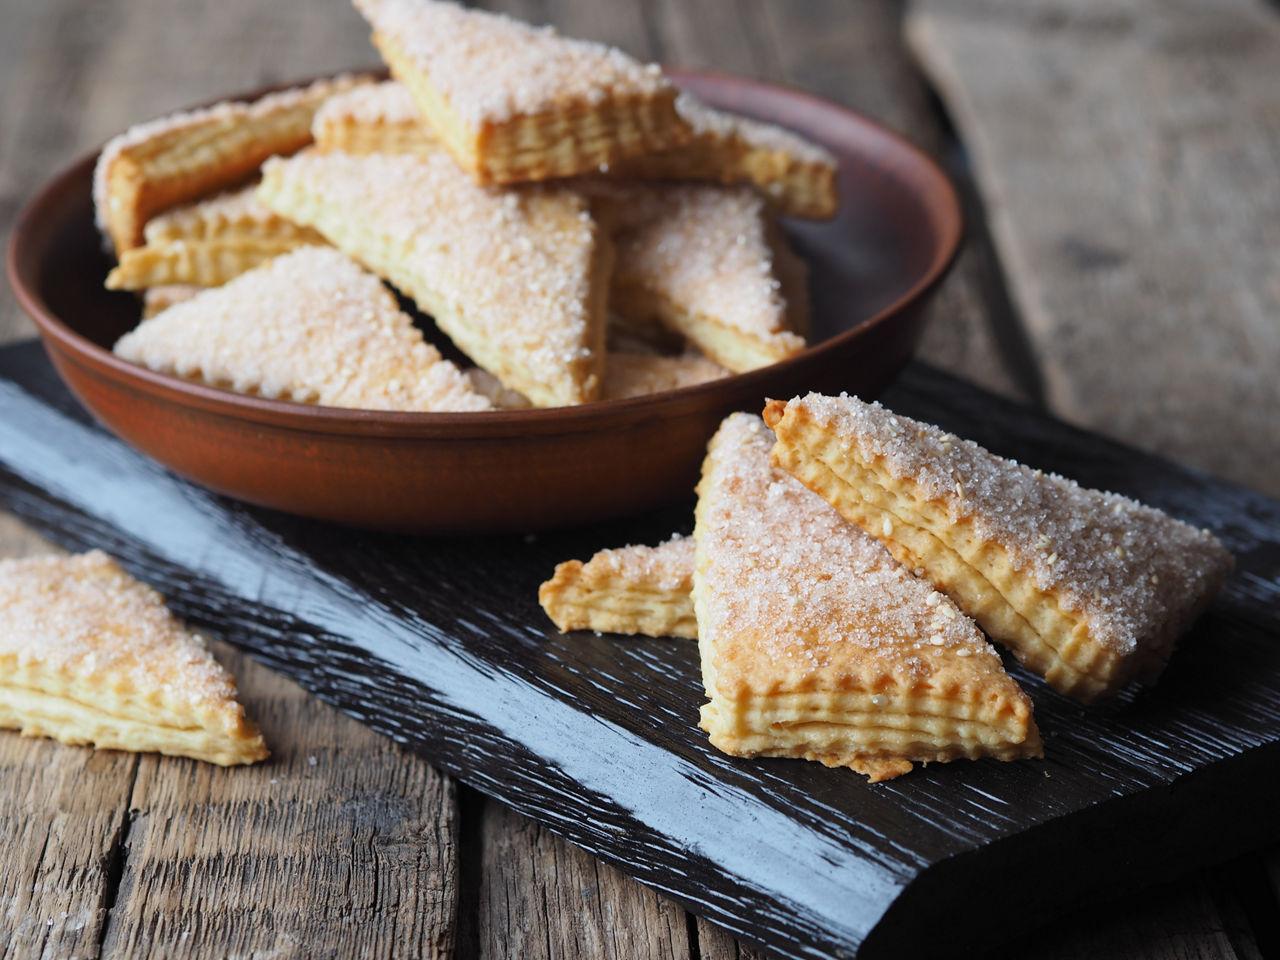 Homemade shortbread puff pastry Triangle in a brown plate on a wooden ancient background. Side view. Place for text.Topped with white sesame seeds and sugar.